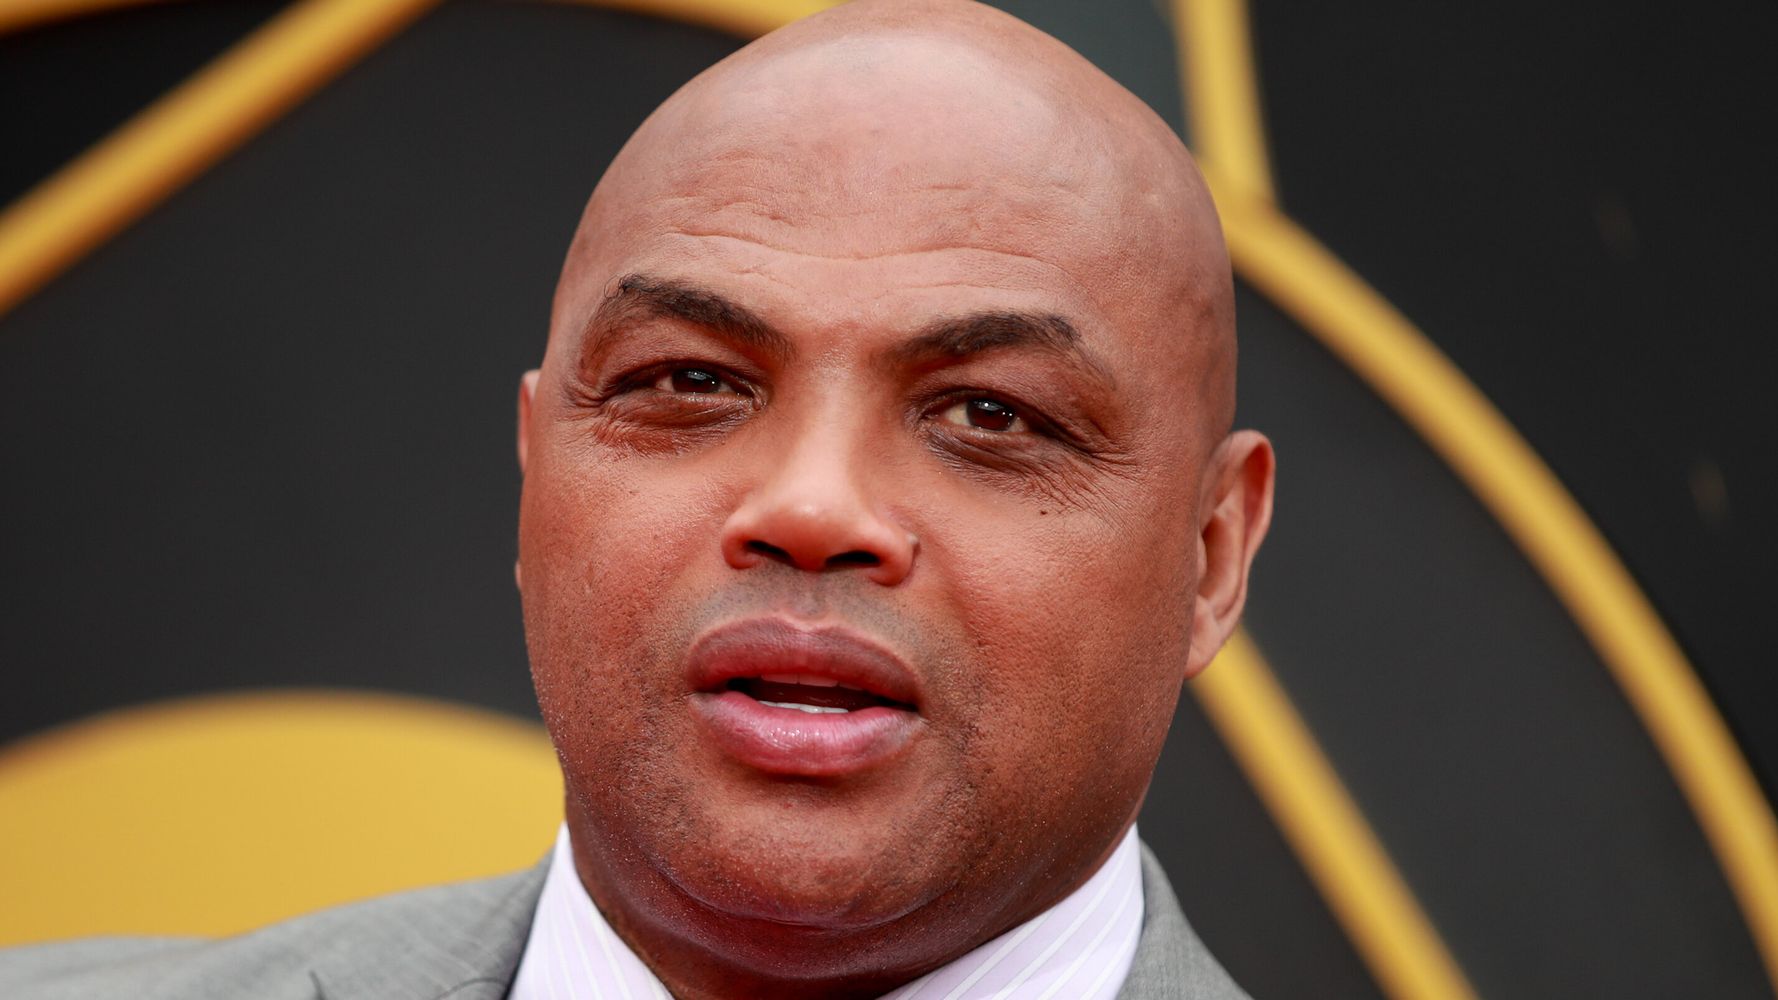 NBA Legend Charles Barkley Says Those Who Refuse Vaccines Are 'A**holes'